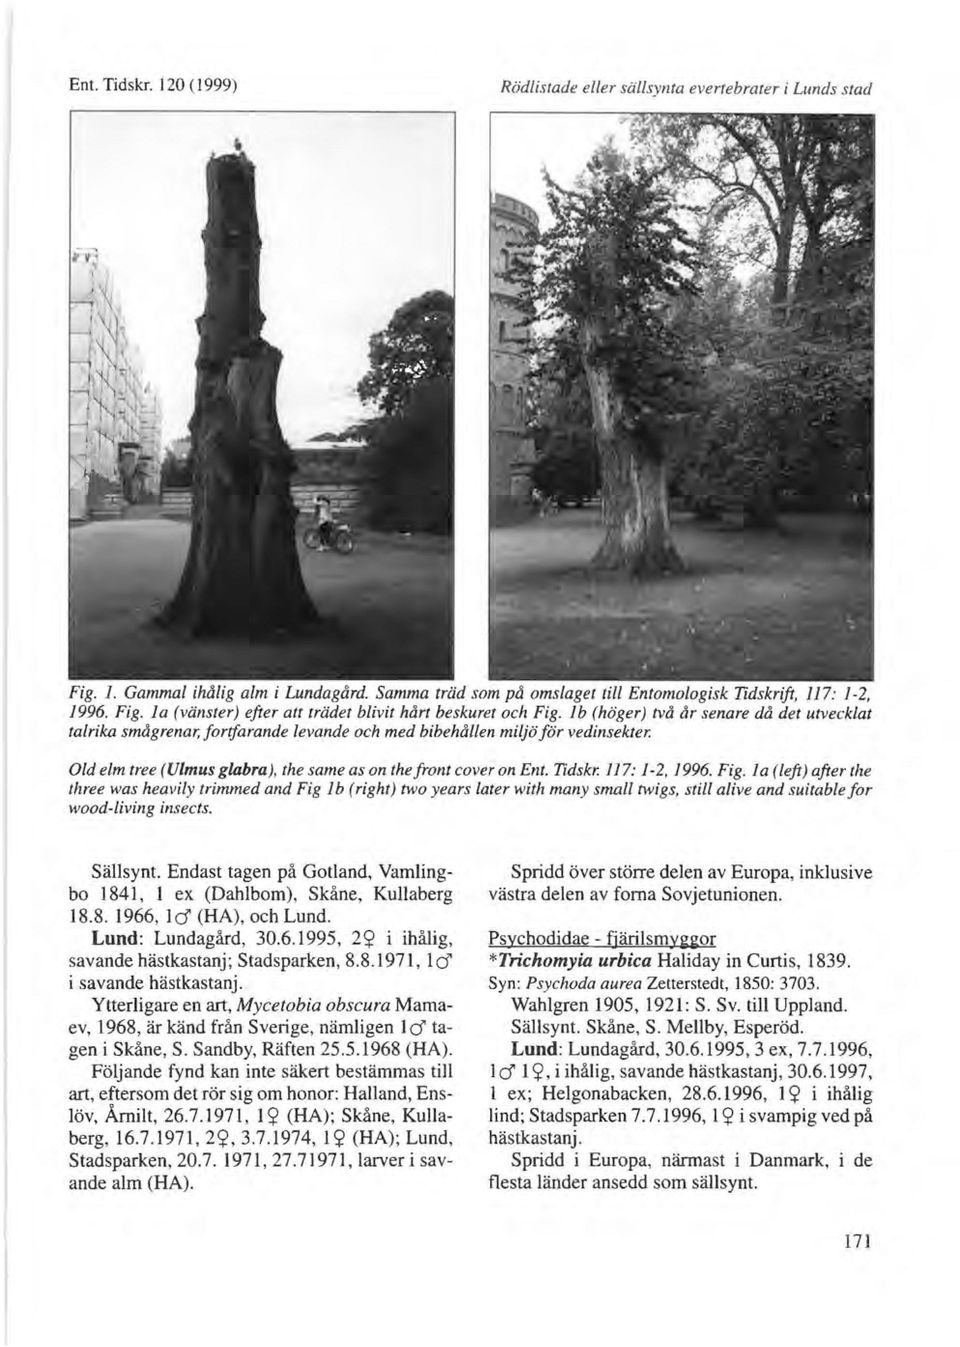 Tidskr: 11 7: J -2, 1996. Fig. I a (left) after the three was heavily trimmed and Fig Ib (right) two years later with many small twigs, still alive and suitable for wood-living insects. Slillsynt.